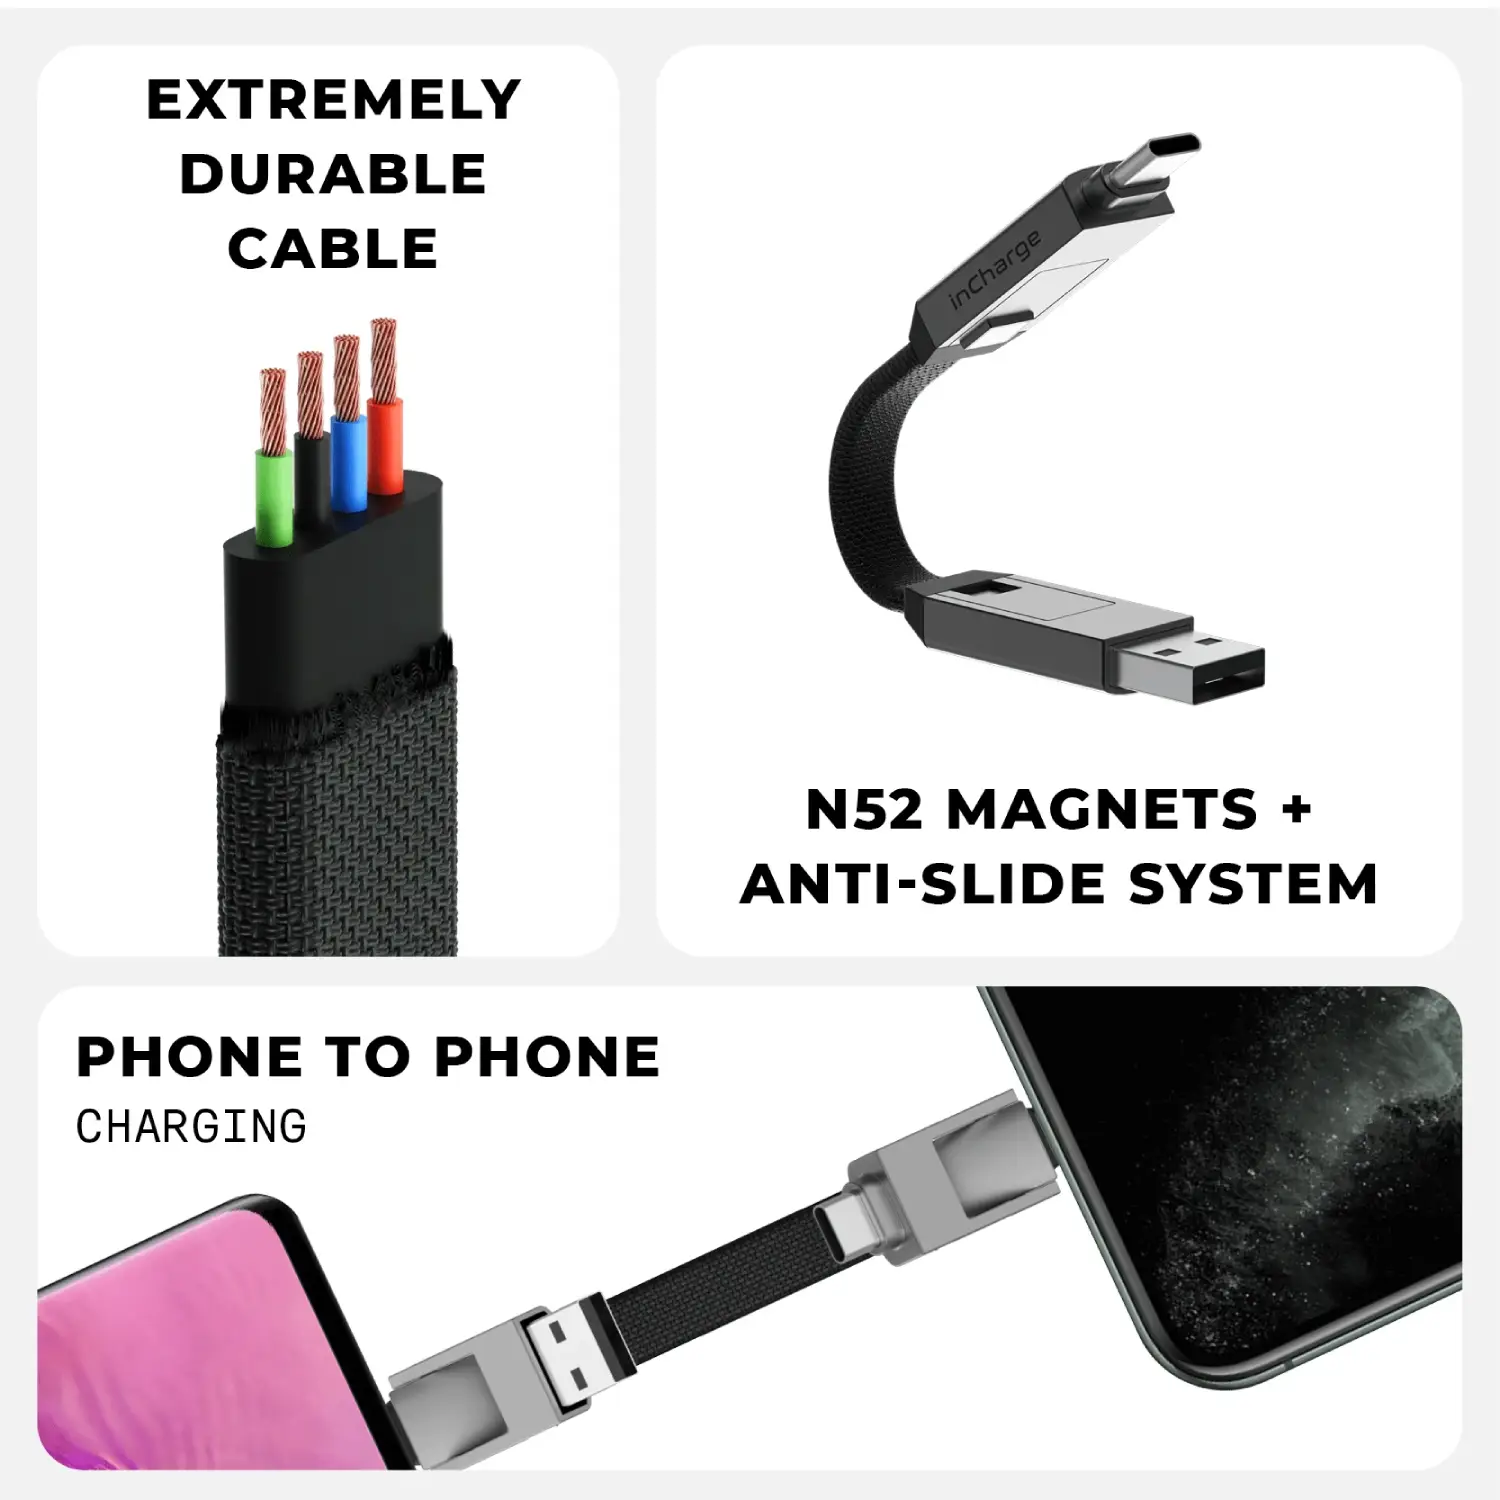 incharge 6 - The Six-in-One Swiss Army Knife of Cables, Portable Keyring Compatible Retail Packaging